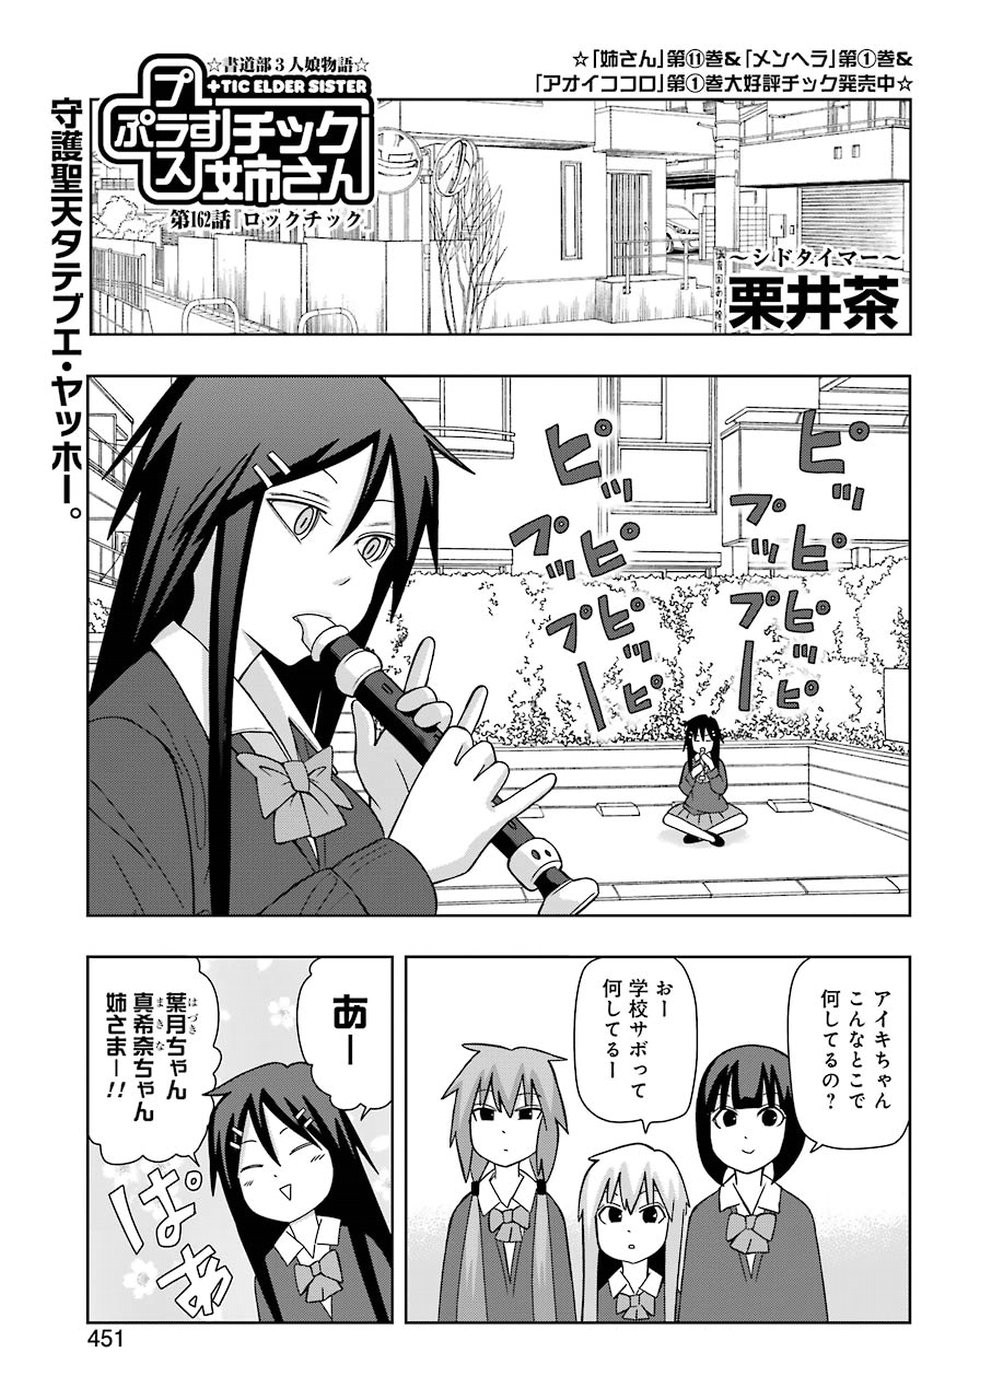 + Tic Nee-san - Chapter 162 - Page 1